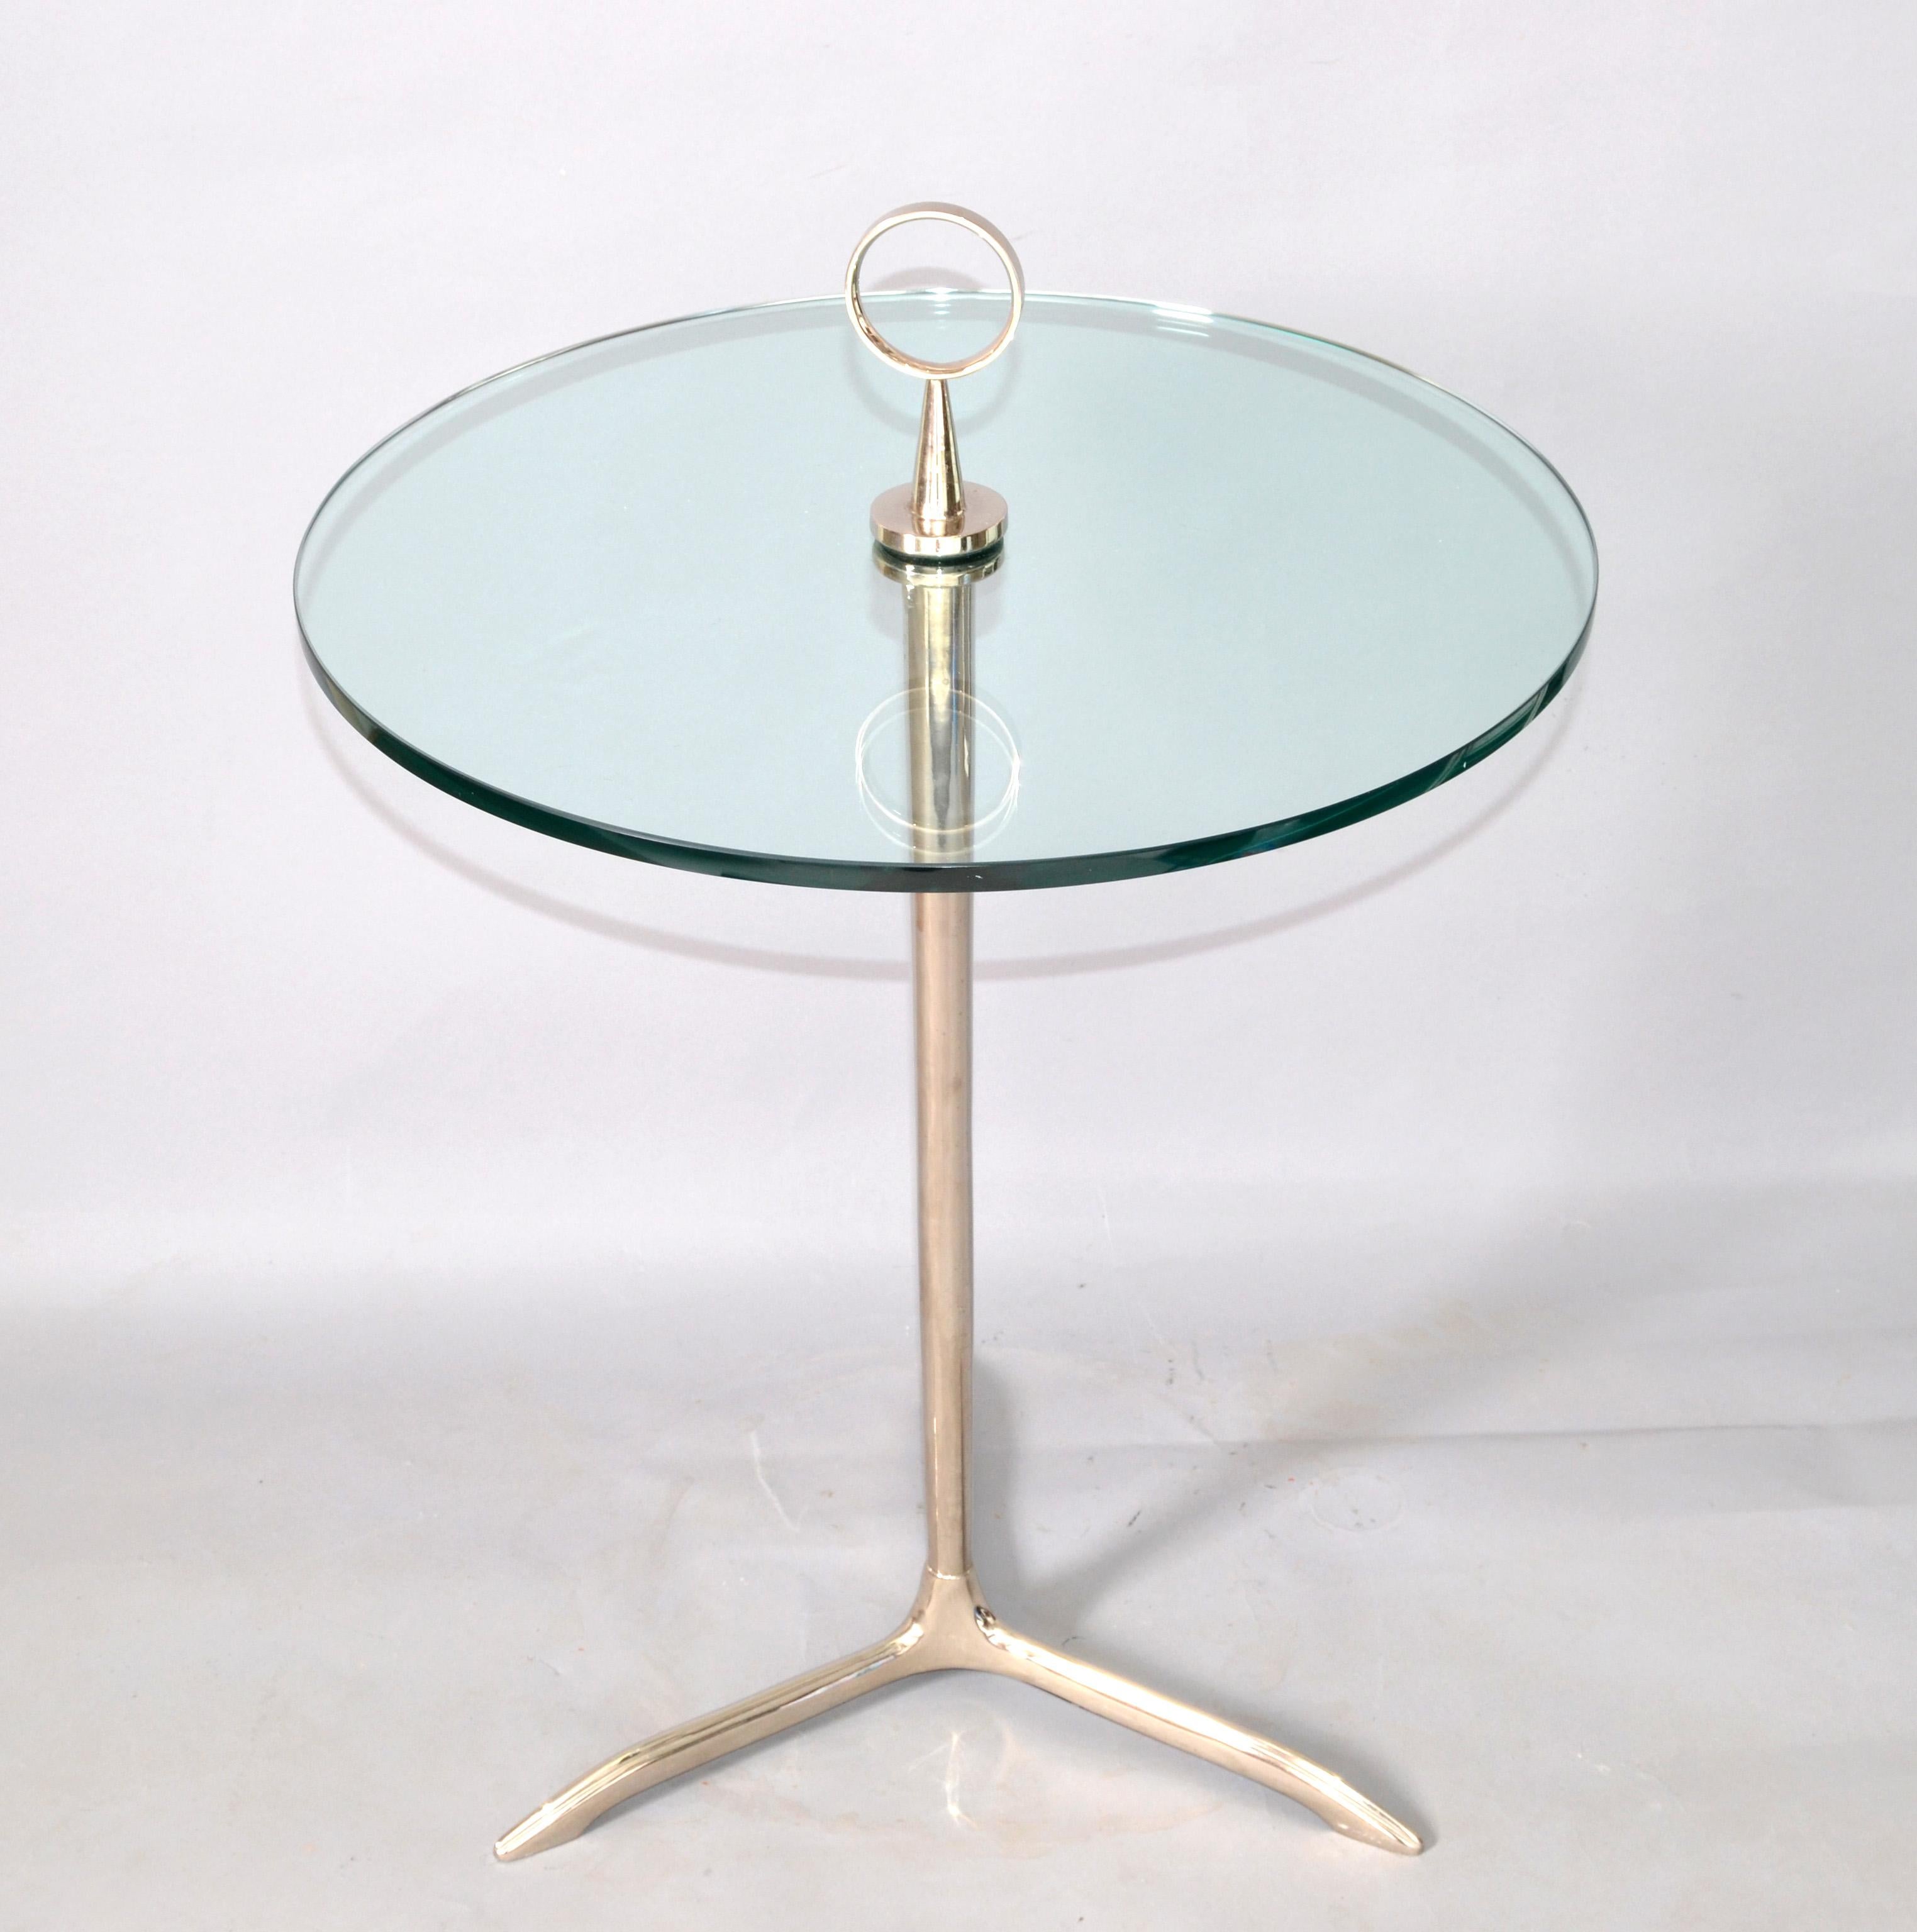 Cesare Lacca Style Stainless Steel & Round Glass Tripod Side Table, Italy, 1950 For Sale 3